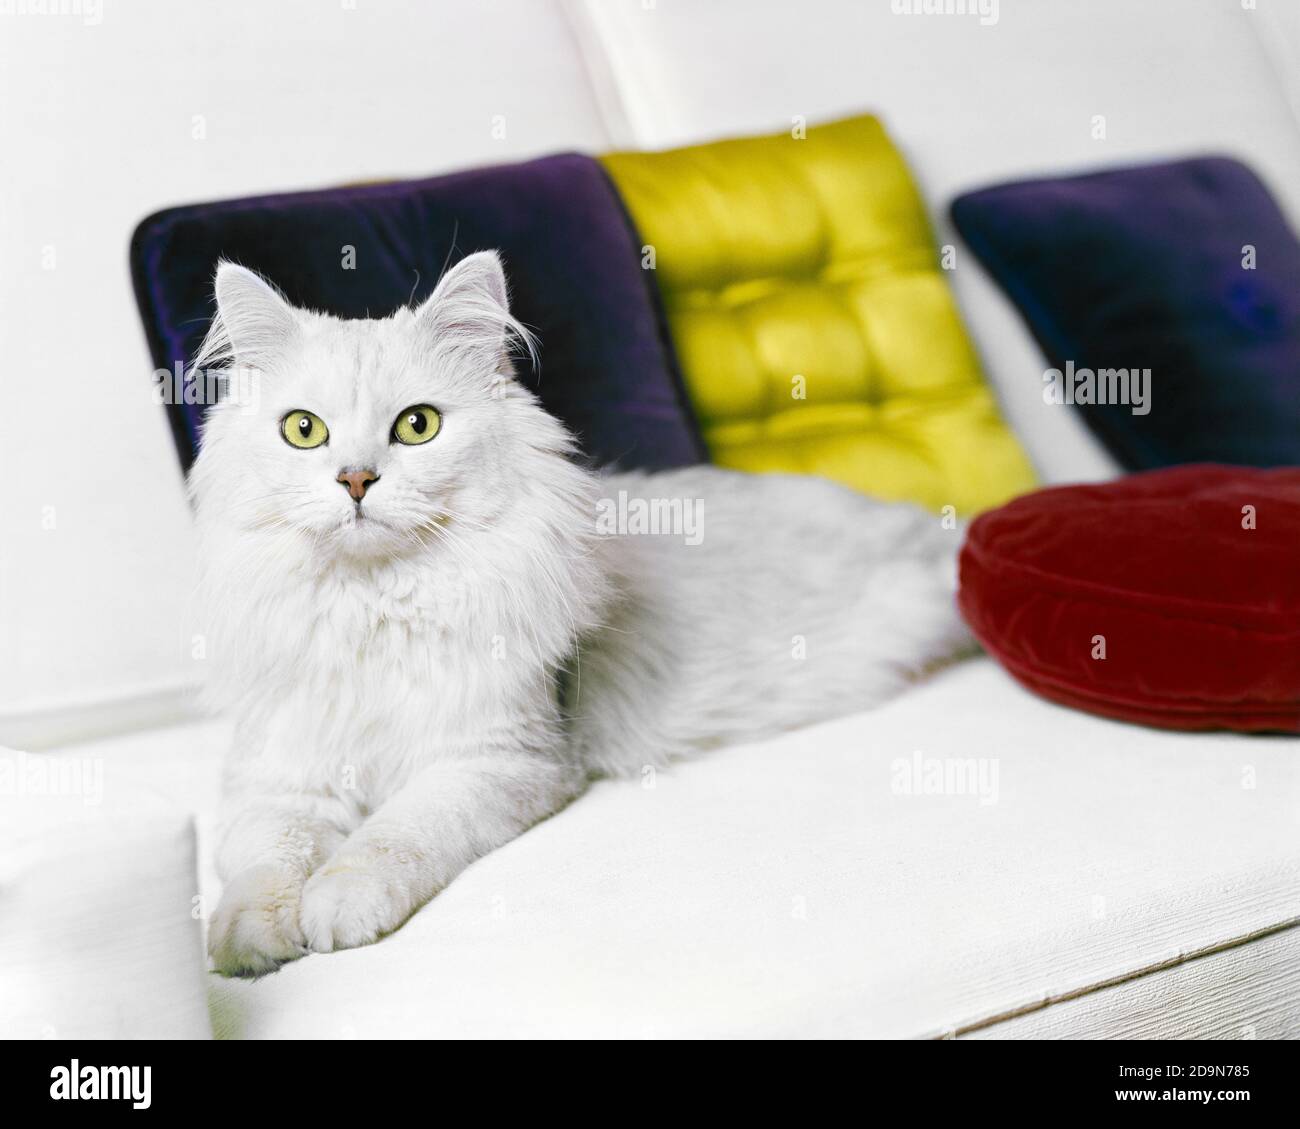 1960s DOMESTIC LONG HAIR WHITE CAT LYING ON WHITE COUCH RED AND YELLOW PILLOWS LOOKING AT CAMERA PAMPERED PET  - kc5186 DUC001 HARS PRINCESS Stock Photo